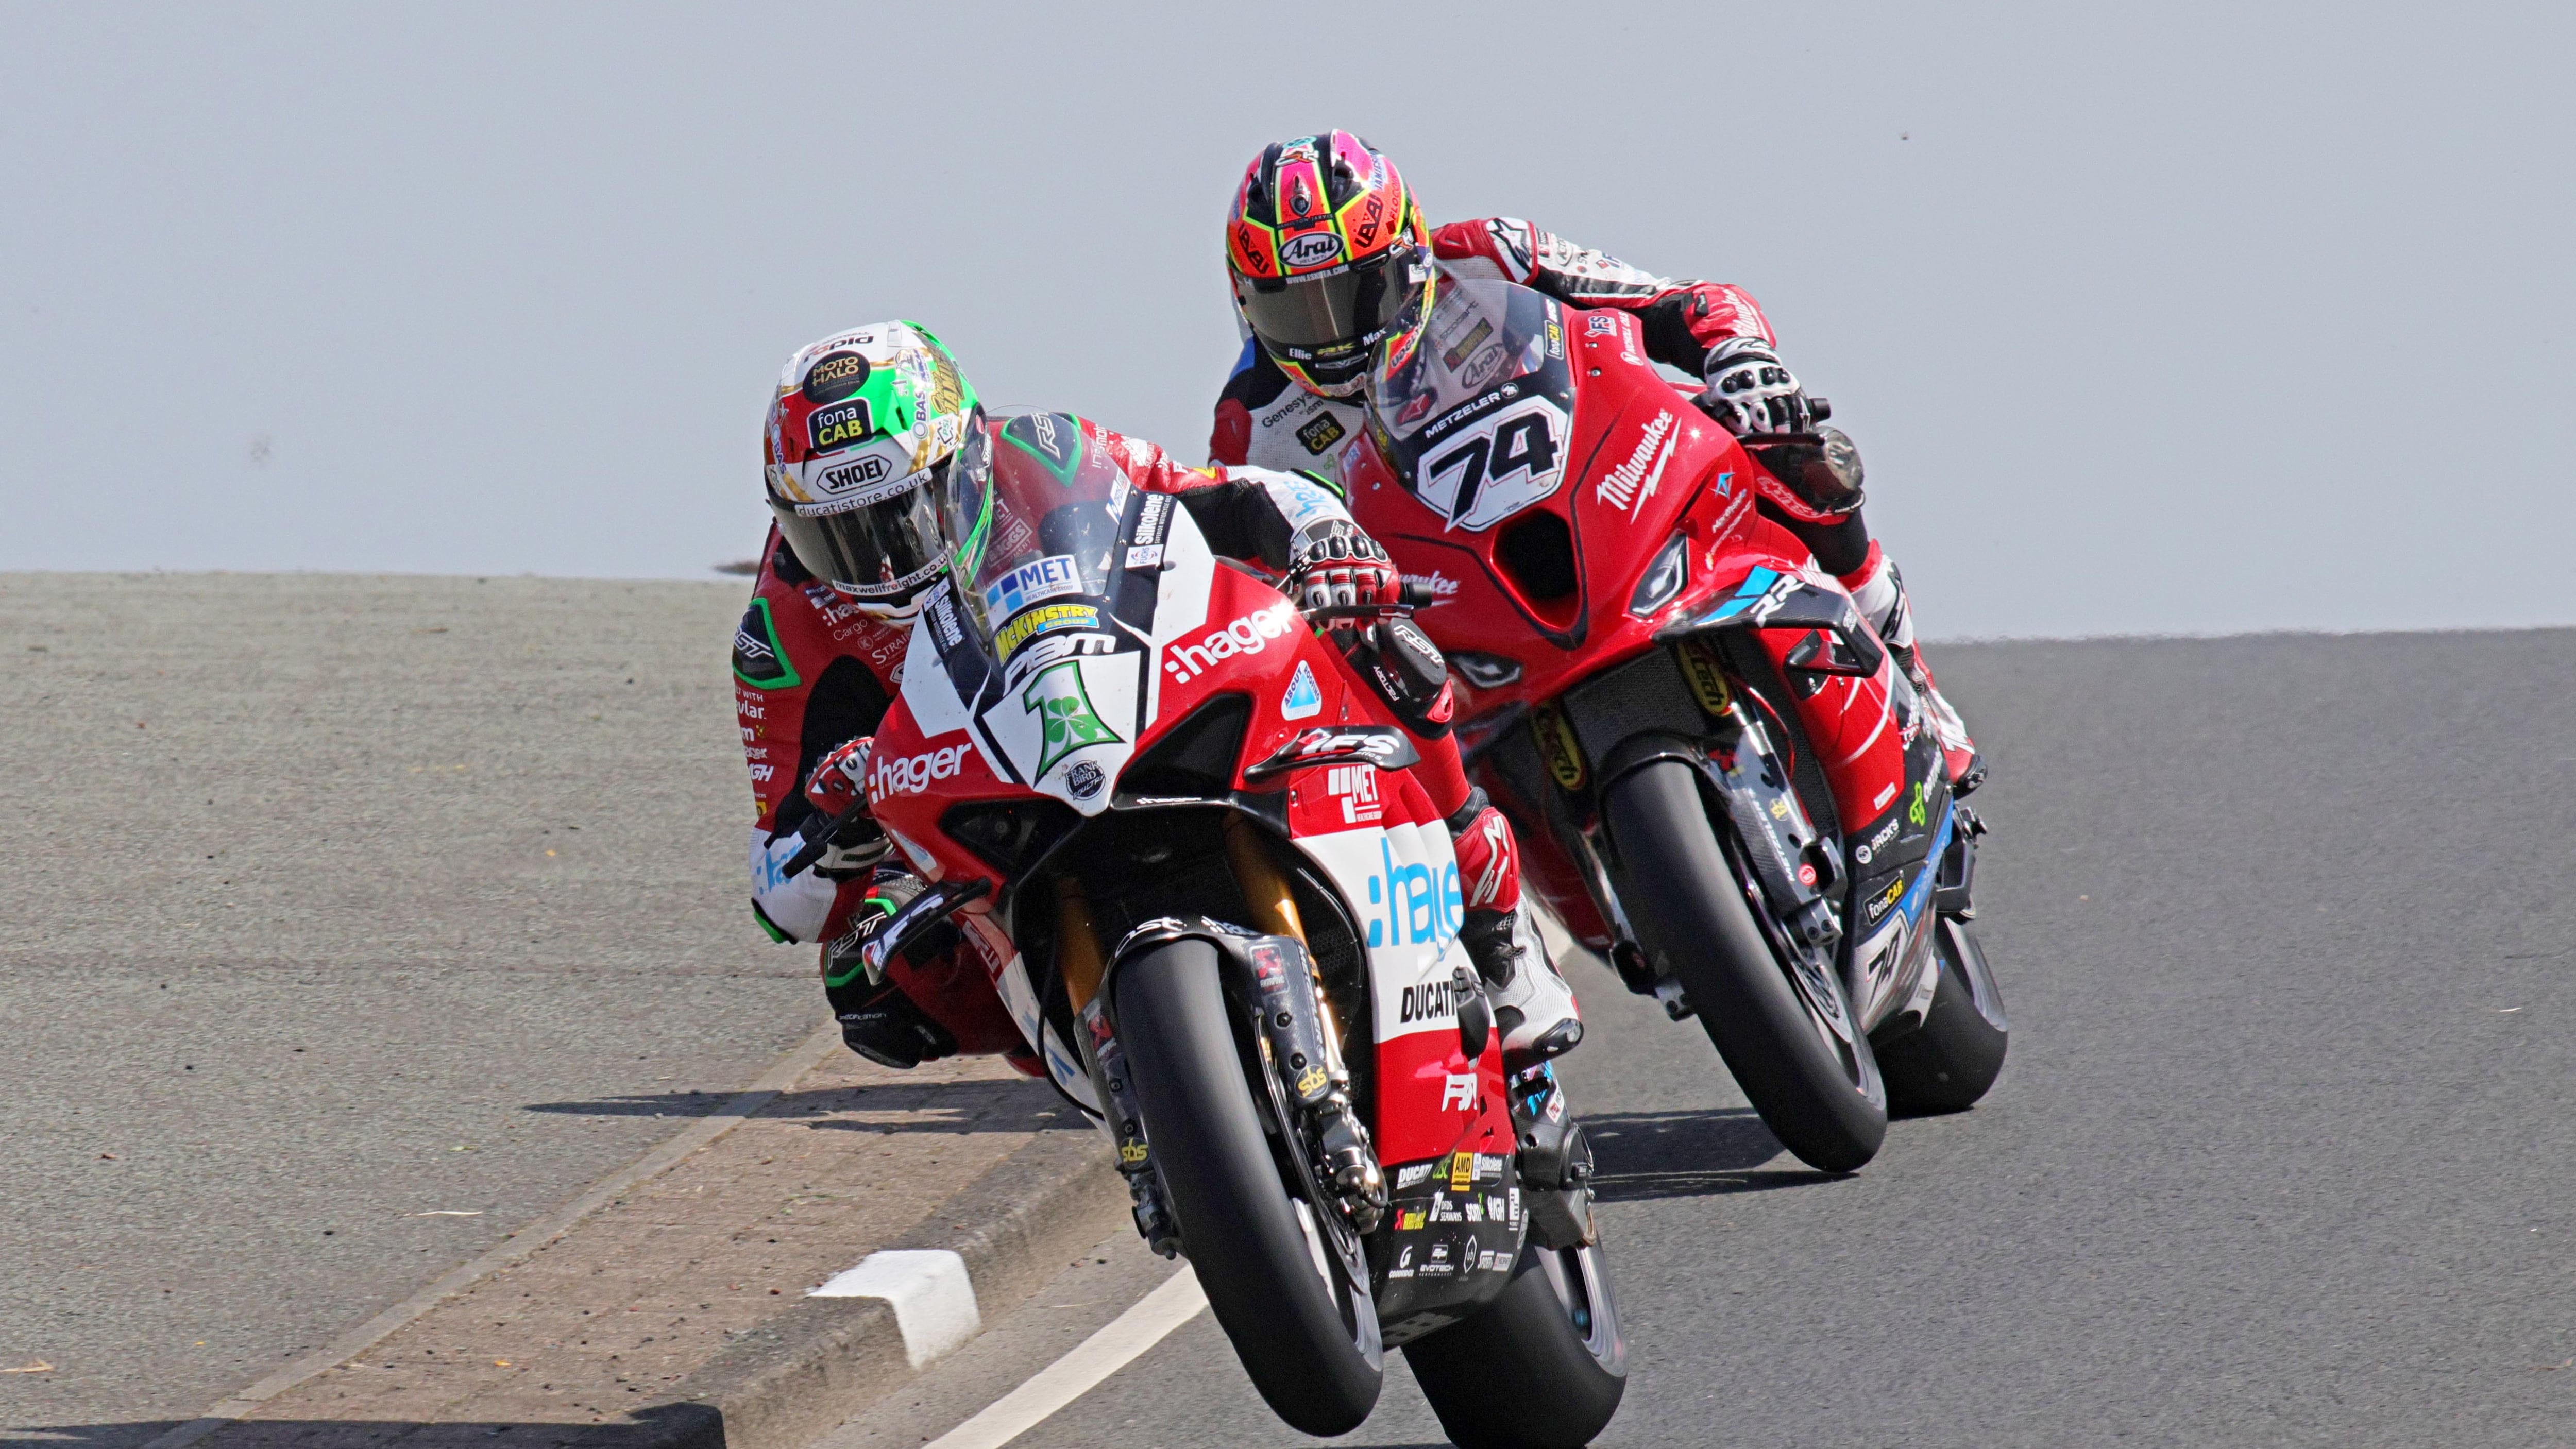 Glenn Irwin holds off the challenge of Davey Todd to win the first Superbike race on Saturday at the North West 200.